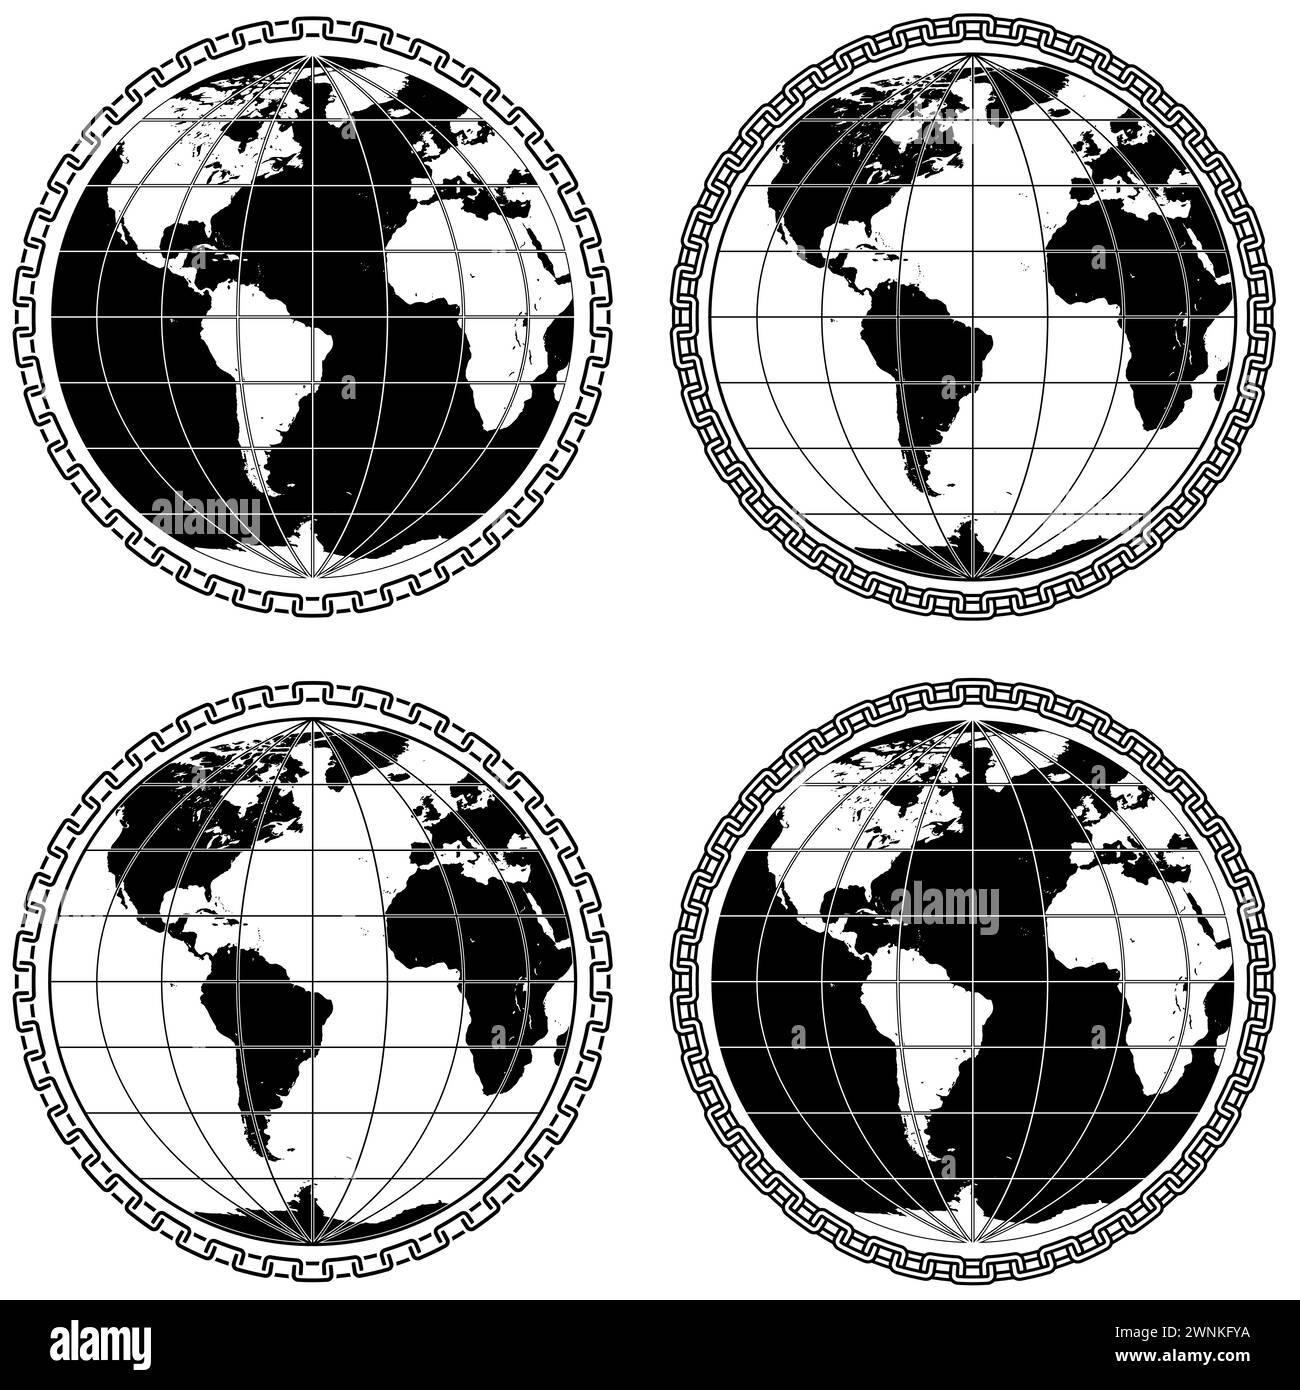 Vector design of Planet Earth surrounded by chains, design of the earth sphere with chains Stock Vector